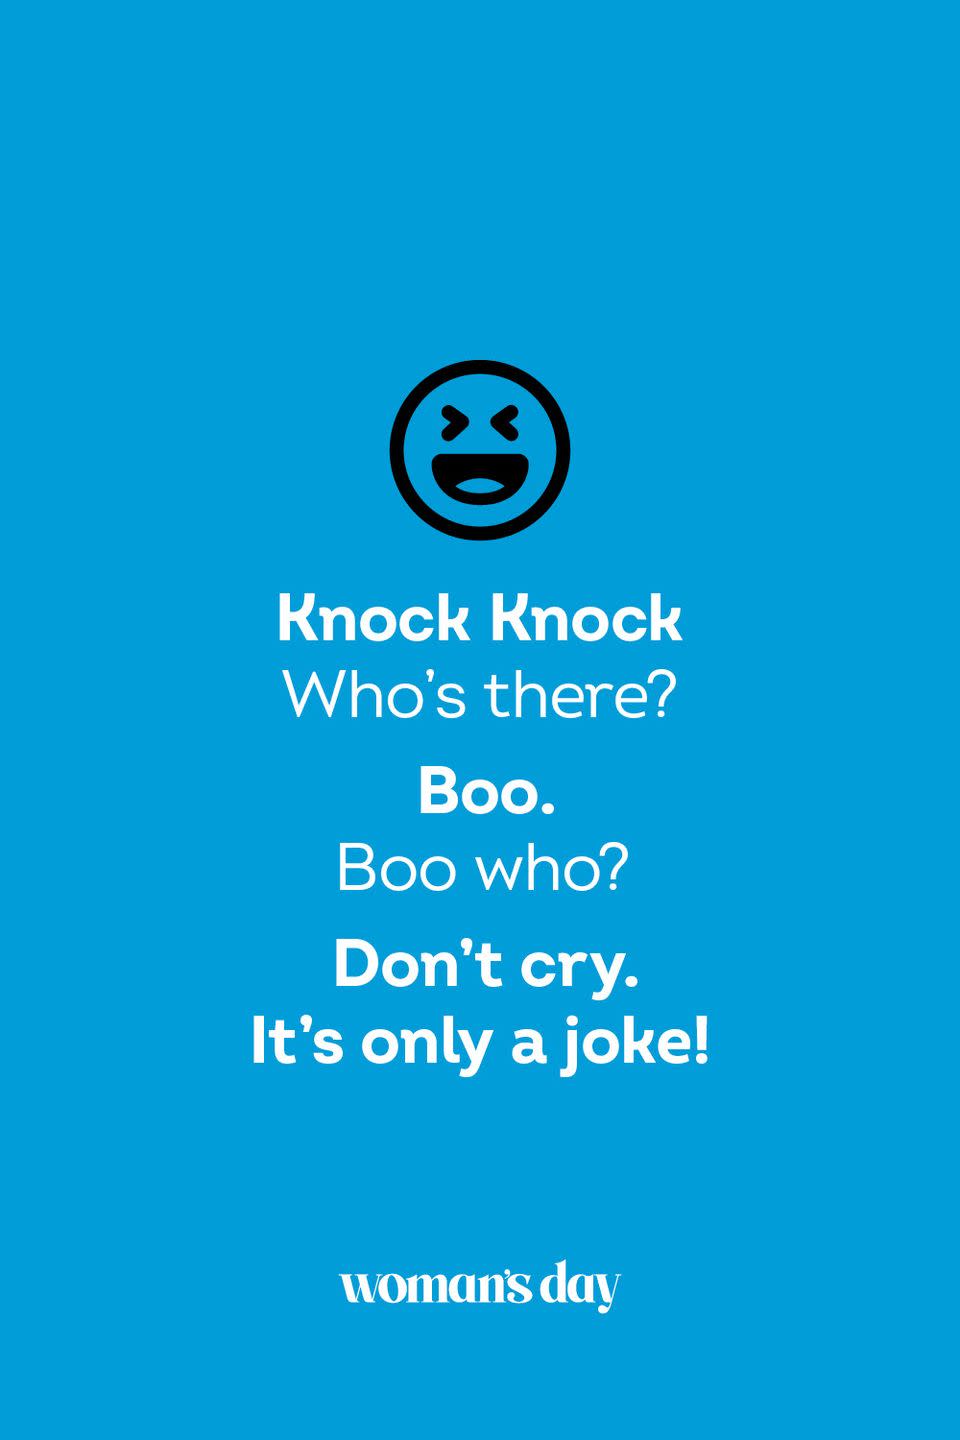 <p><strong>Knock Knock</strong></p><p><em>Who’s there? </em></p><p><strong>Boo.</strong></p><p><em>Boo who?</em></p><p><strong>Don’t cry. It’s only a joke!</strong></p>